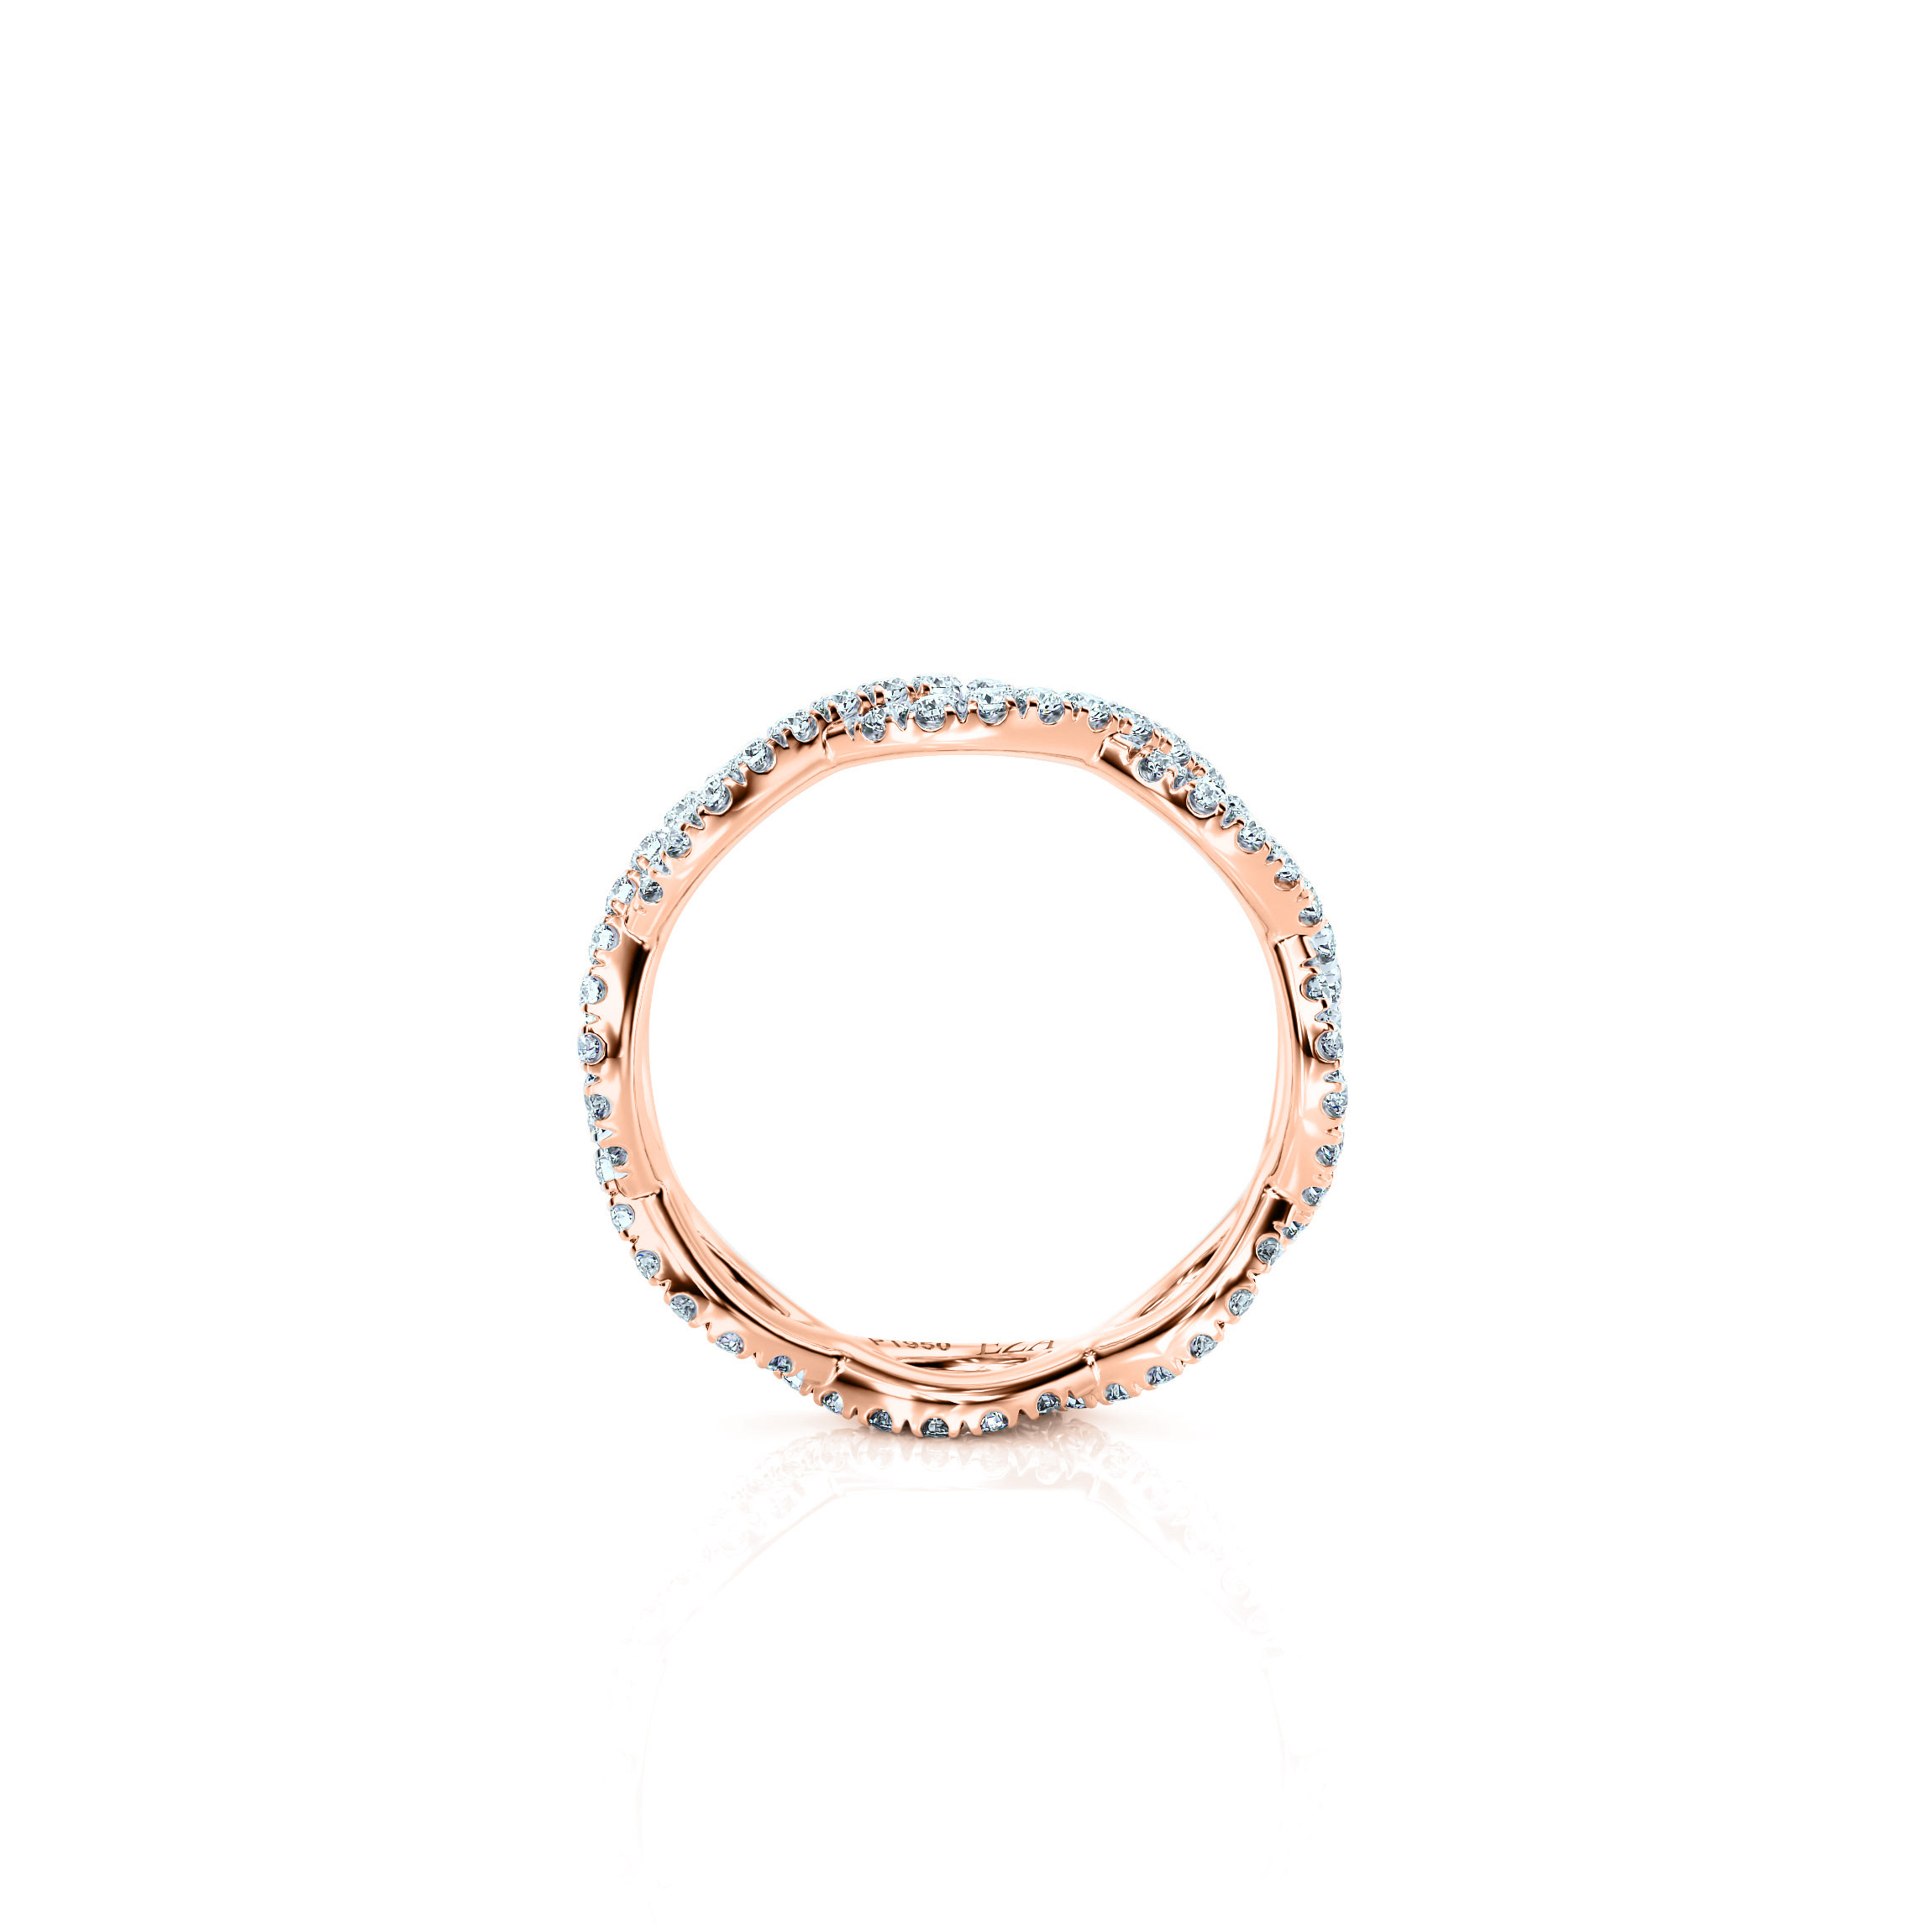 Trauring Eternal Wave Couple | 14K Roségold 3